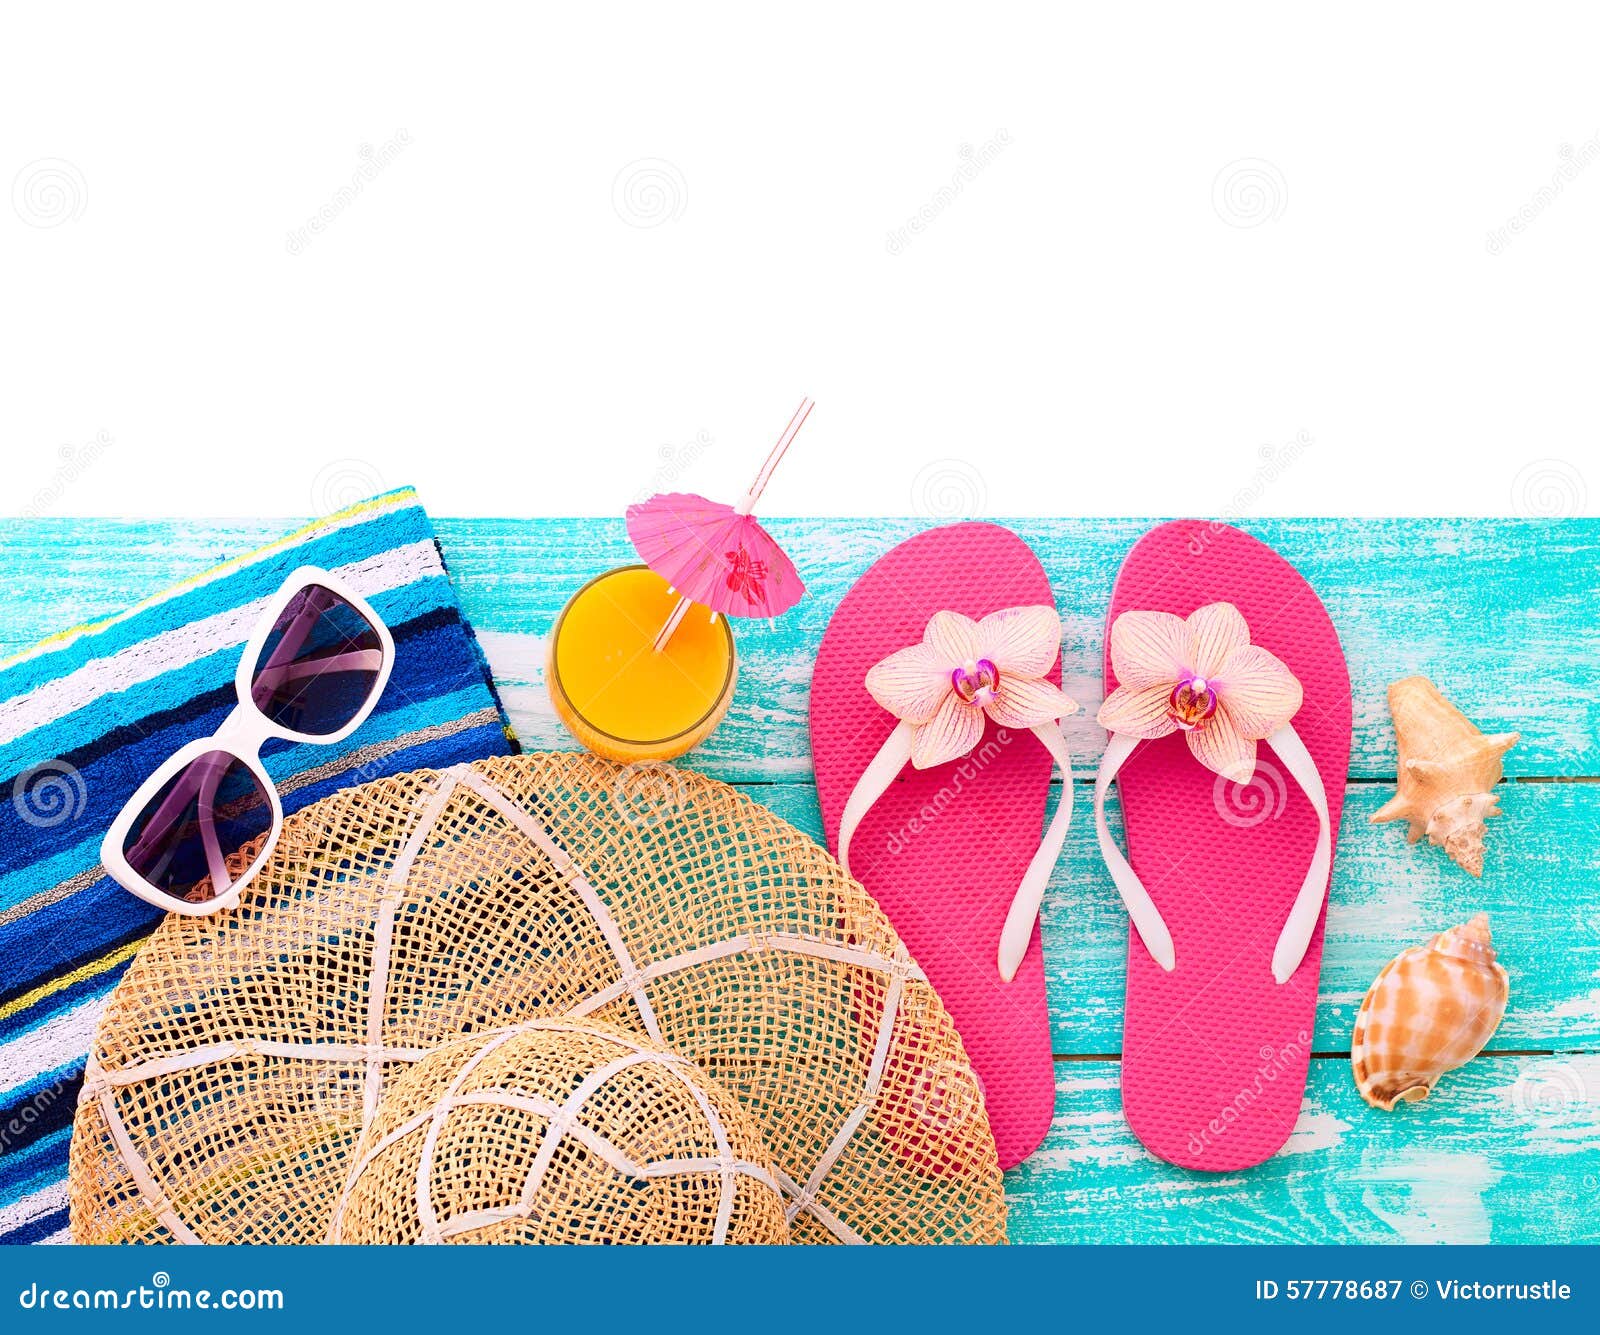 Summer Vacation. Pink Sandals by Swimming Pool Stock Image - Image of ...